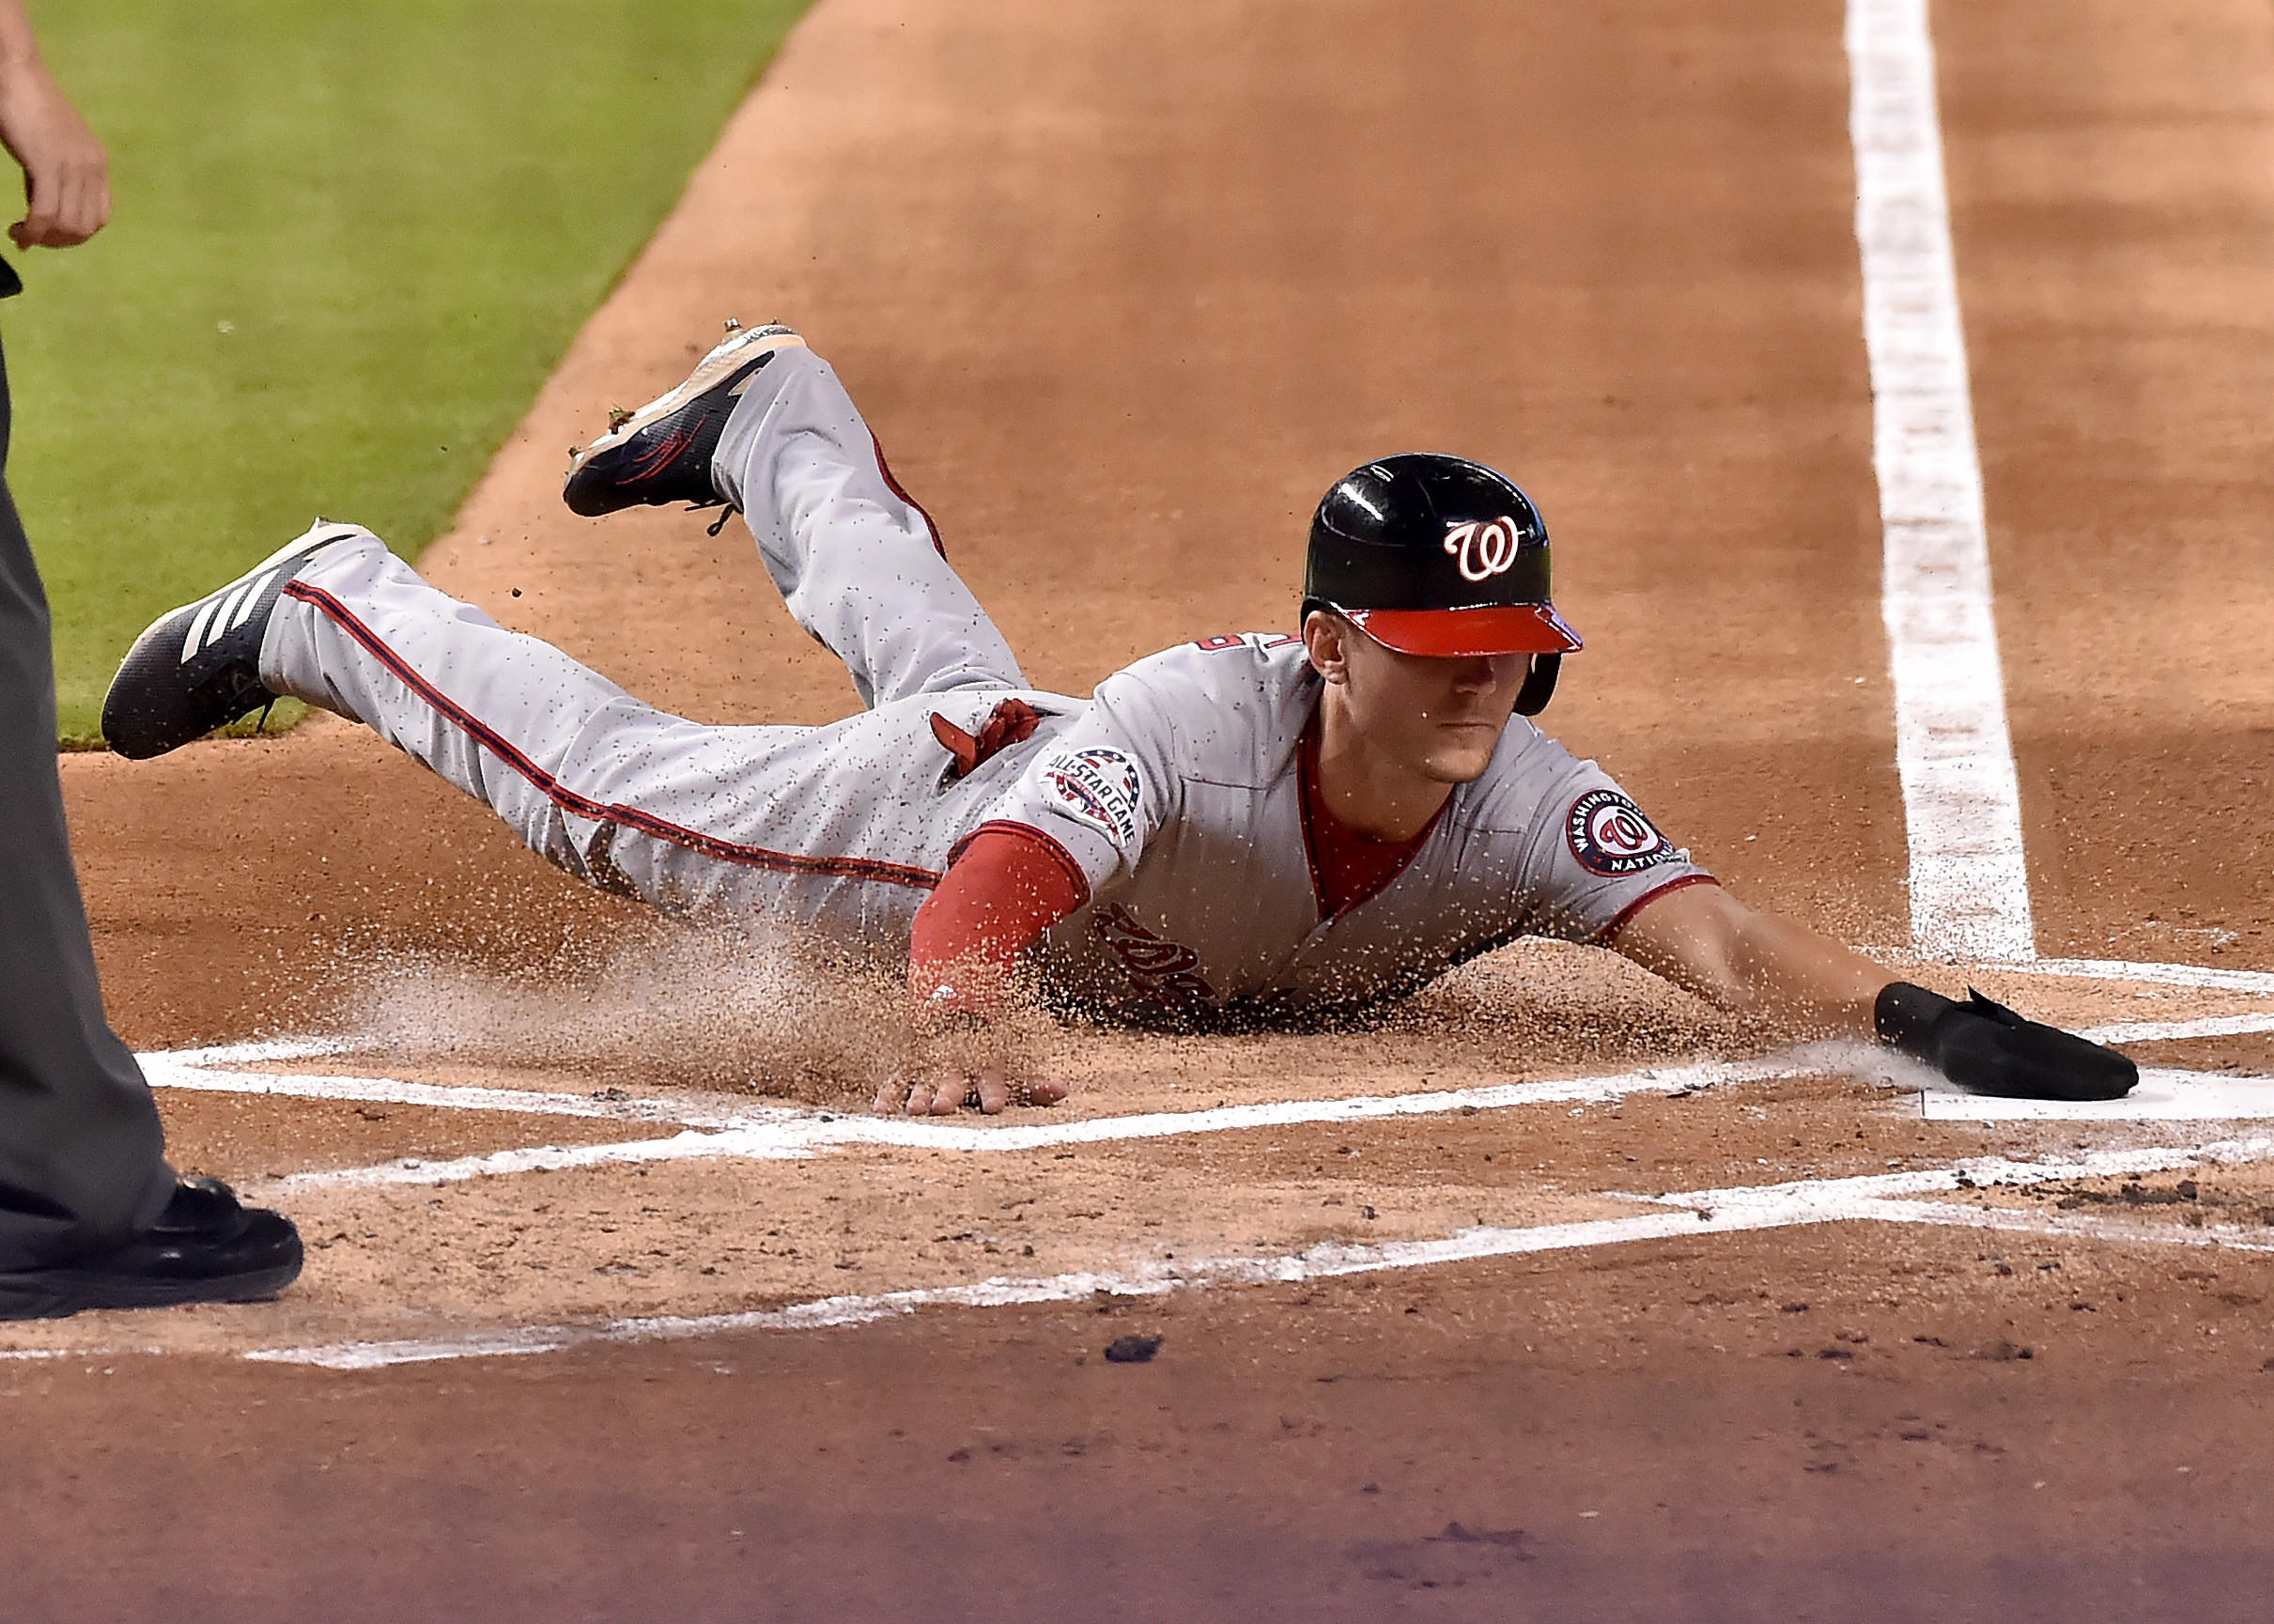 Not a folktale: Washington Nationals' Trea Turner really is that